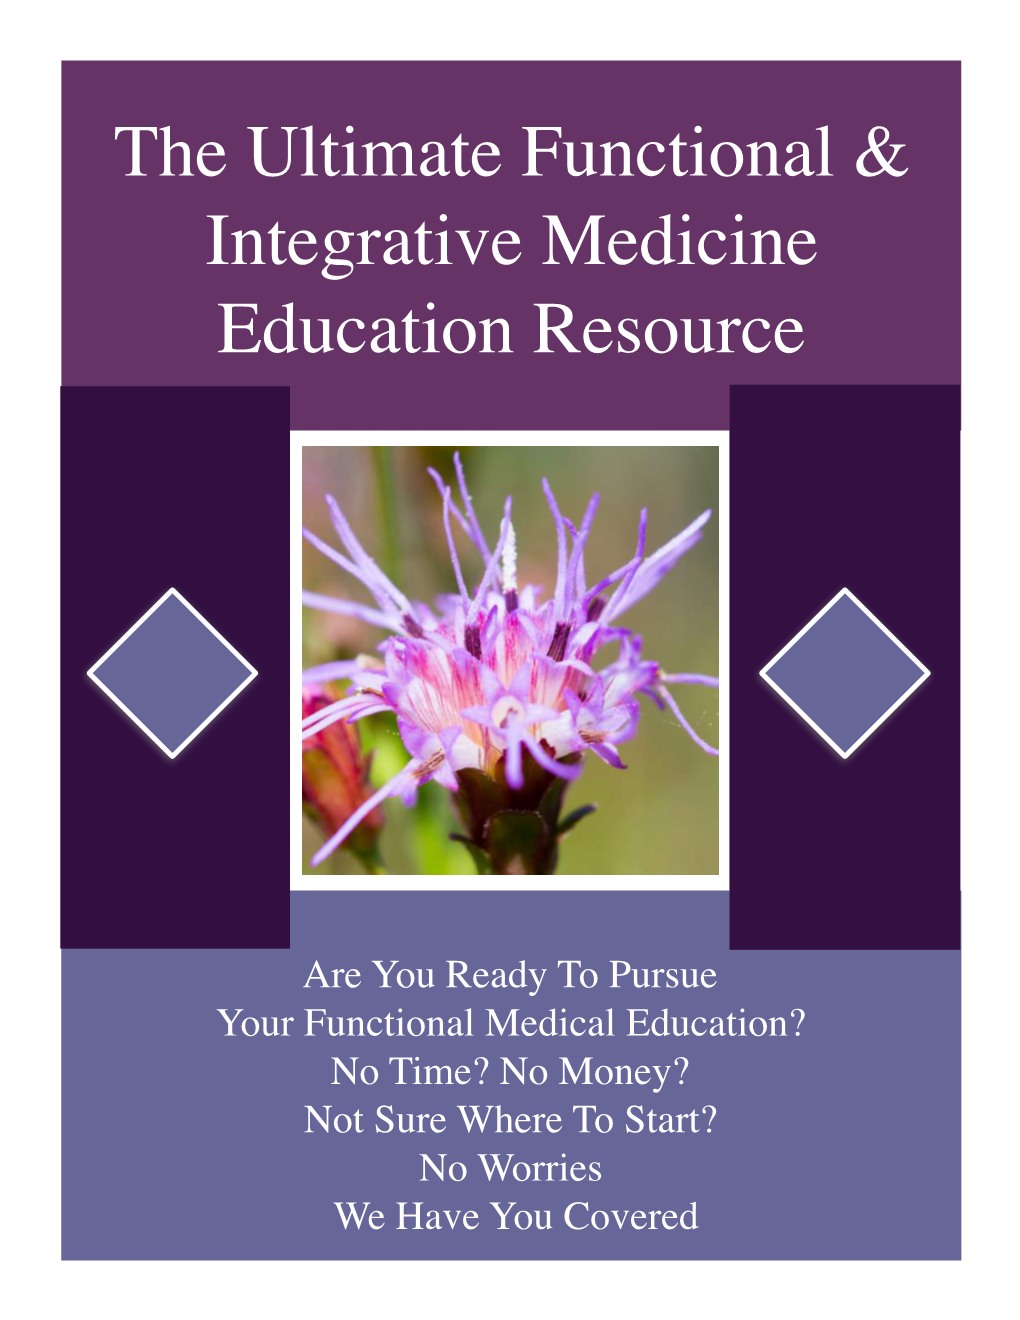 The Ultimate Functional & Integrative Medicine Education Resource